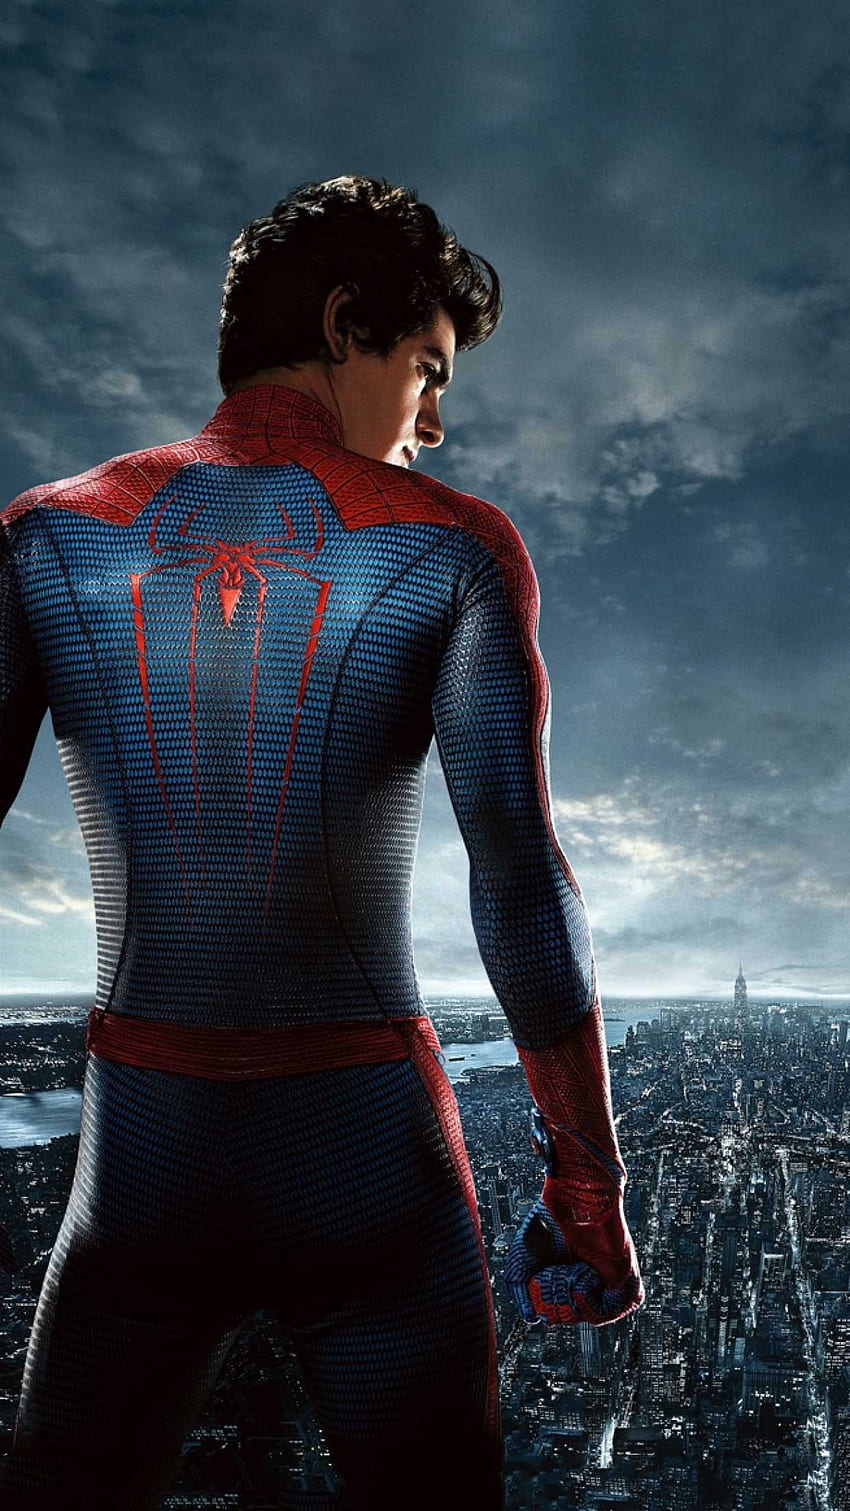 HD wallpaper Andrew Garfield as SpiderMan movies The Amazing SpiderMan   Wallpaper Flare